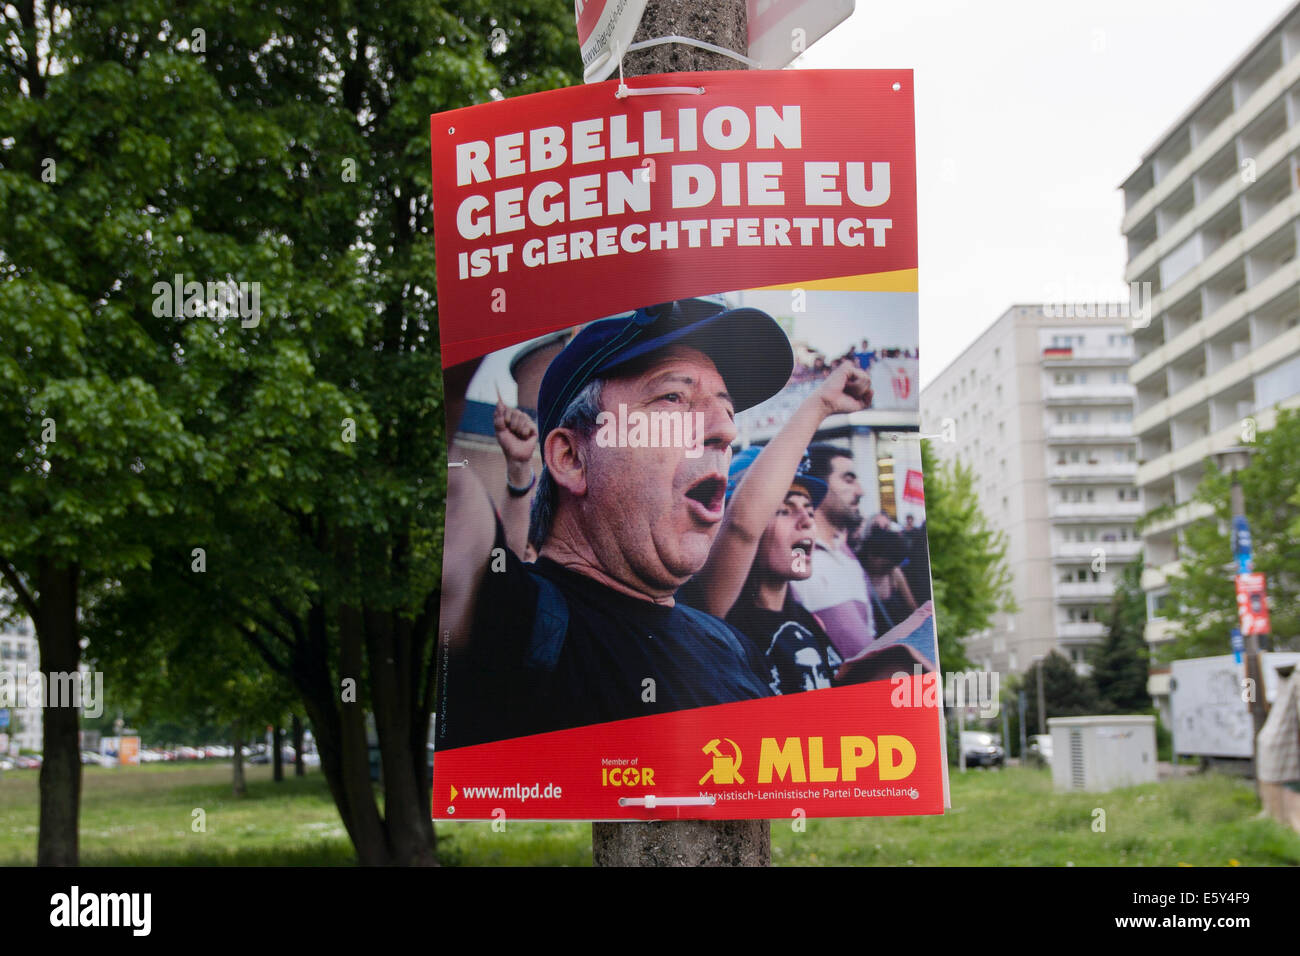 Election poster for MLPD in Berlin, Germany. Stock Photo